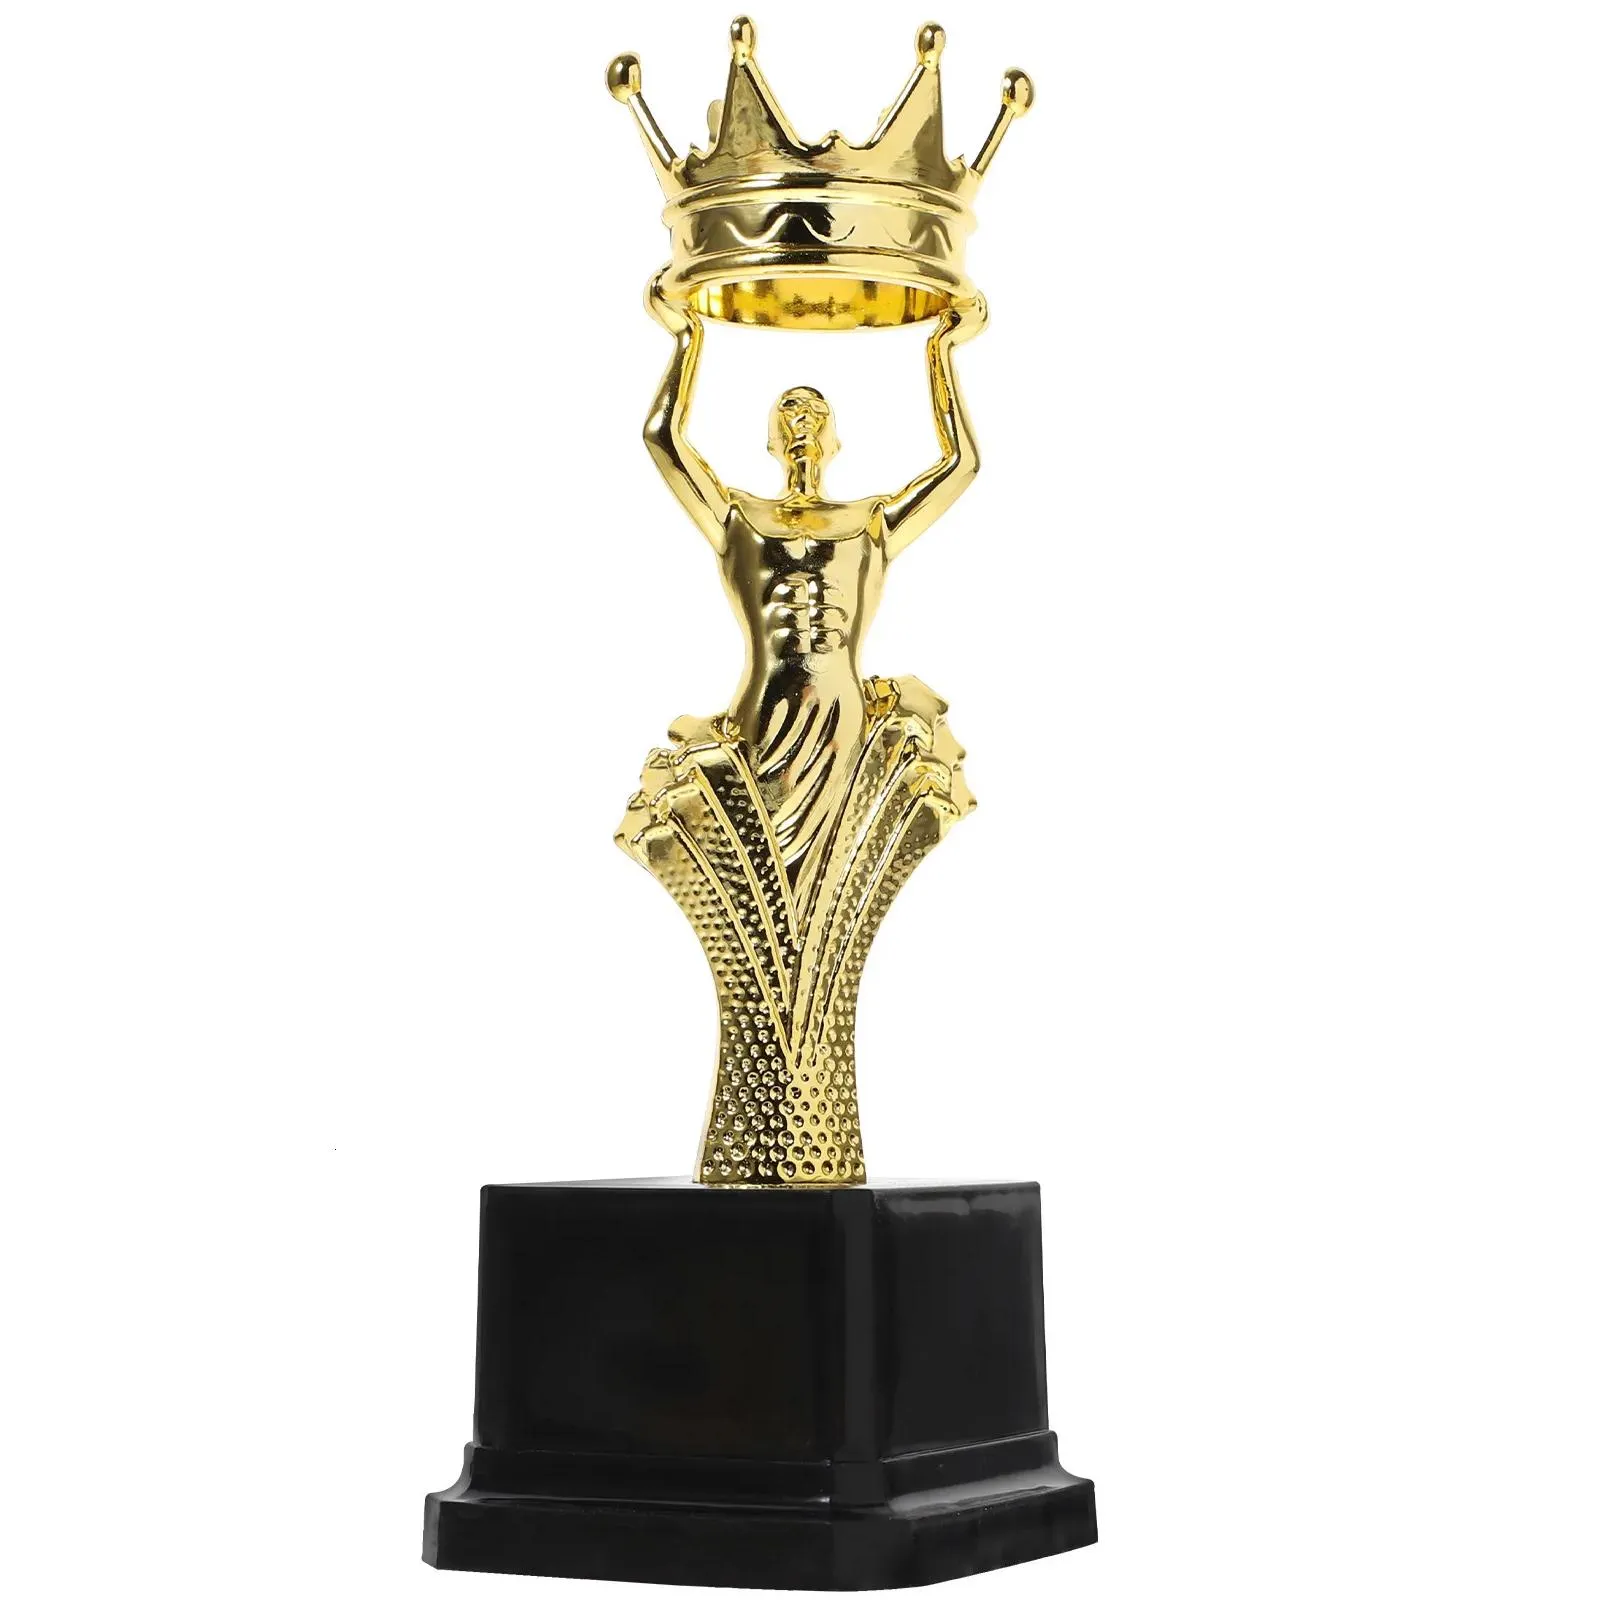 decorative objects figurines awards cup trophy trophies kids school trophy prizes kids props sports trophy prize game 230810